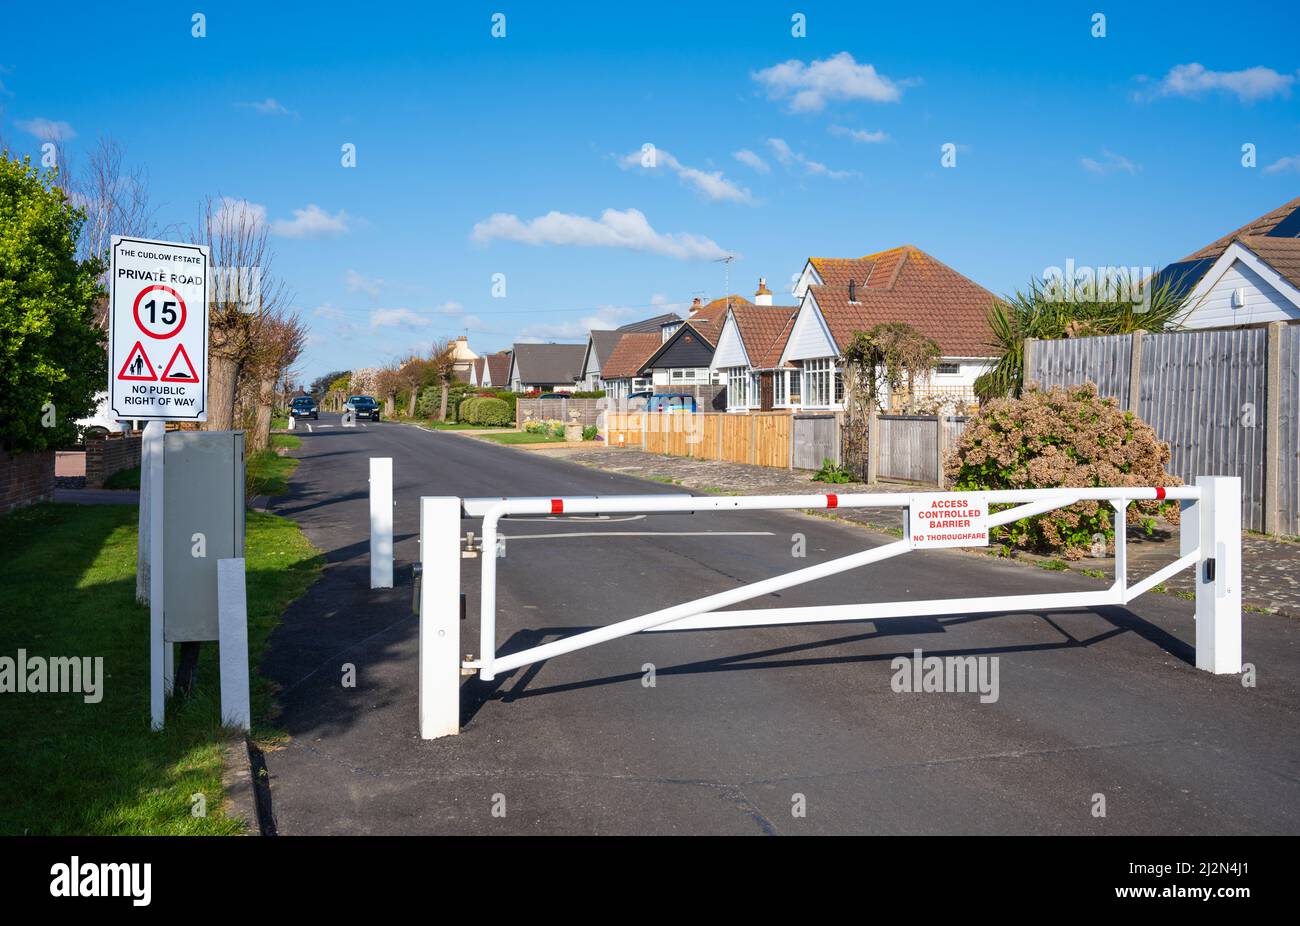 Closed gate at a gated entrance with 15MPH speed limit sign to a private road at Knightscroft Avenue, Rustington, West Sussex, England, UK. Stock Photo